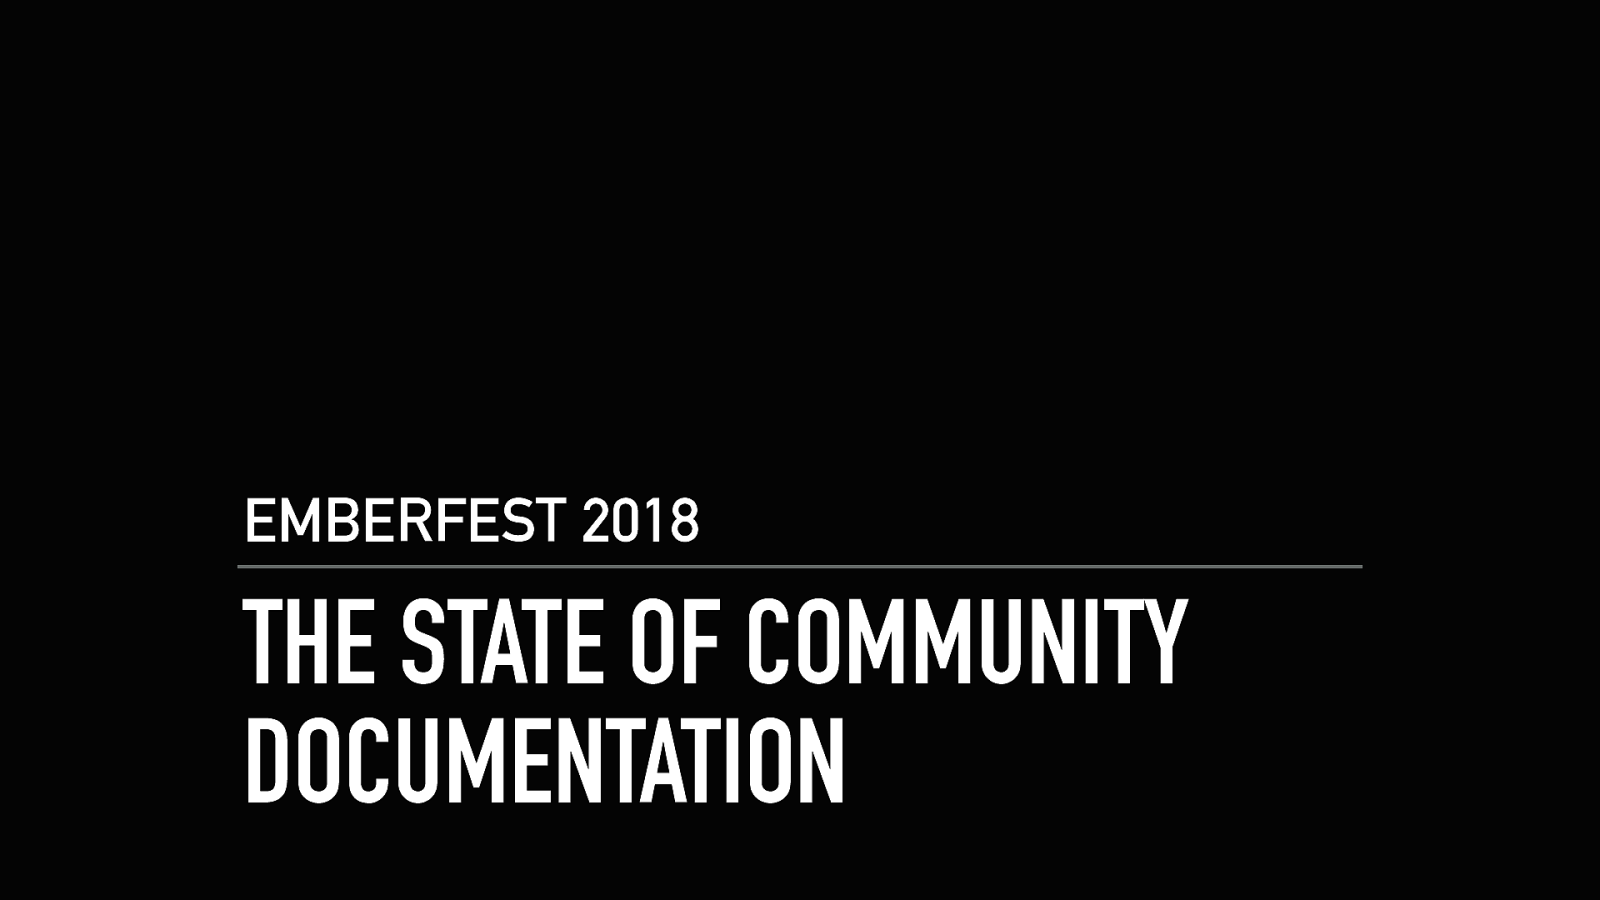 The State of Community Documentation